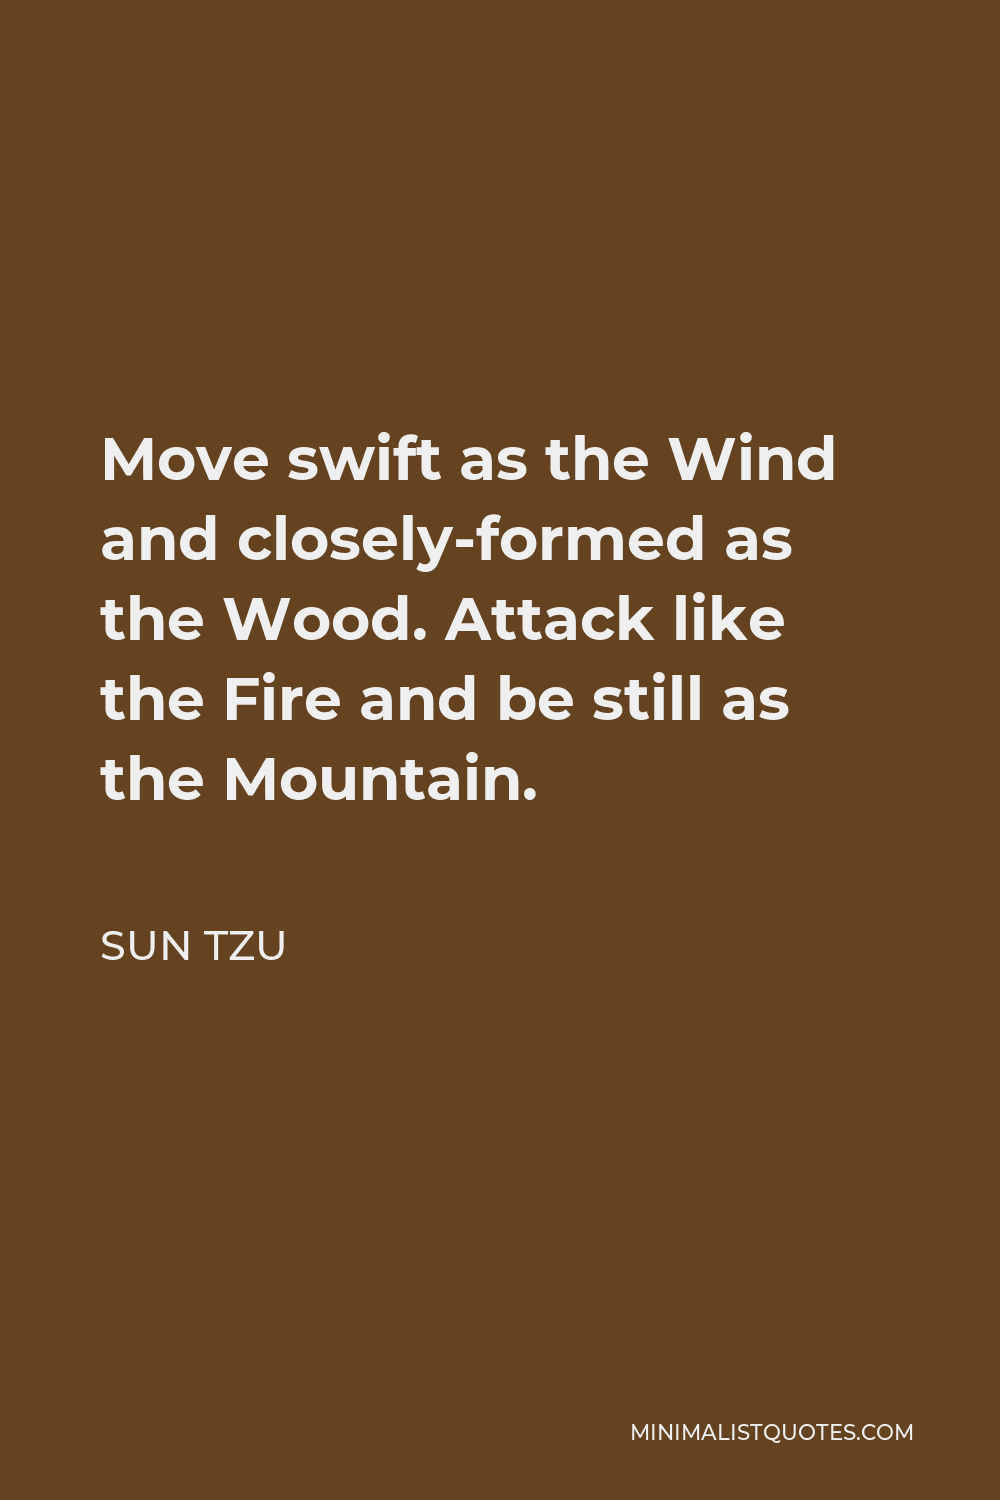 Sun Tzu Quote - Move swift as the Wind and closely-formed as the Wood. Attack like the Fire and be still as the Mountain.